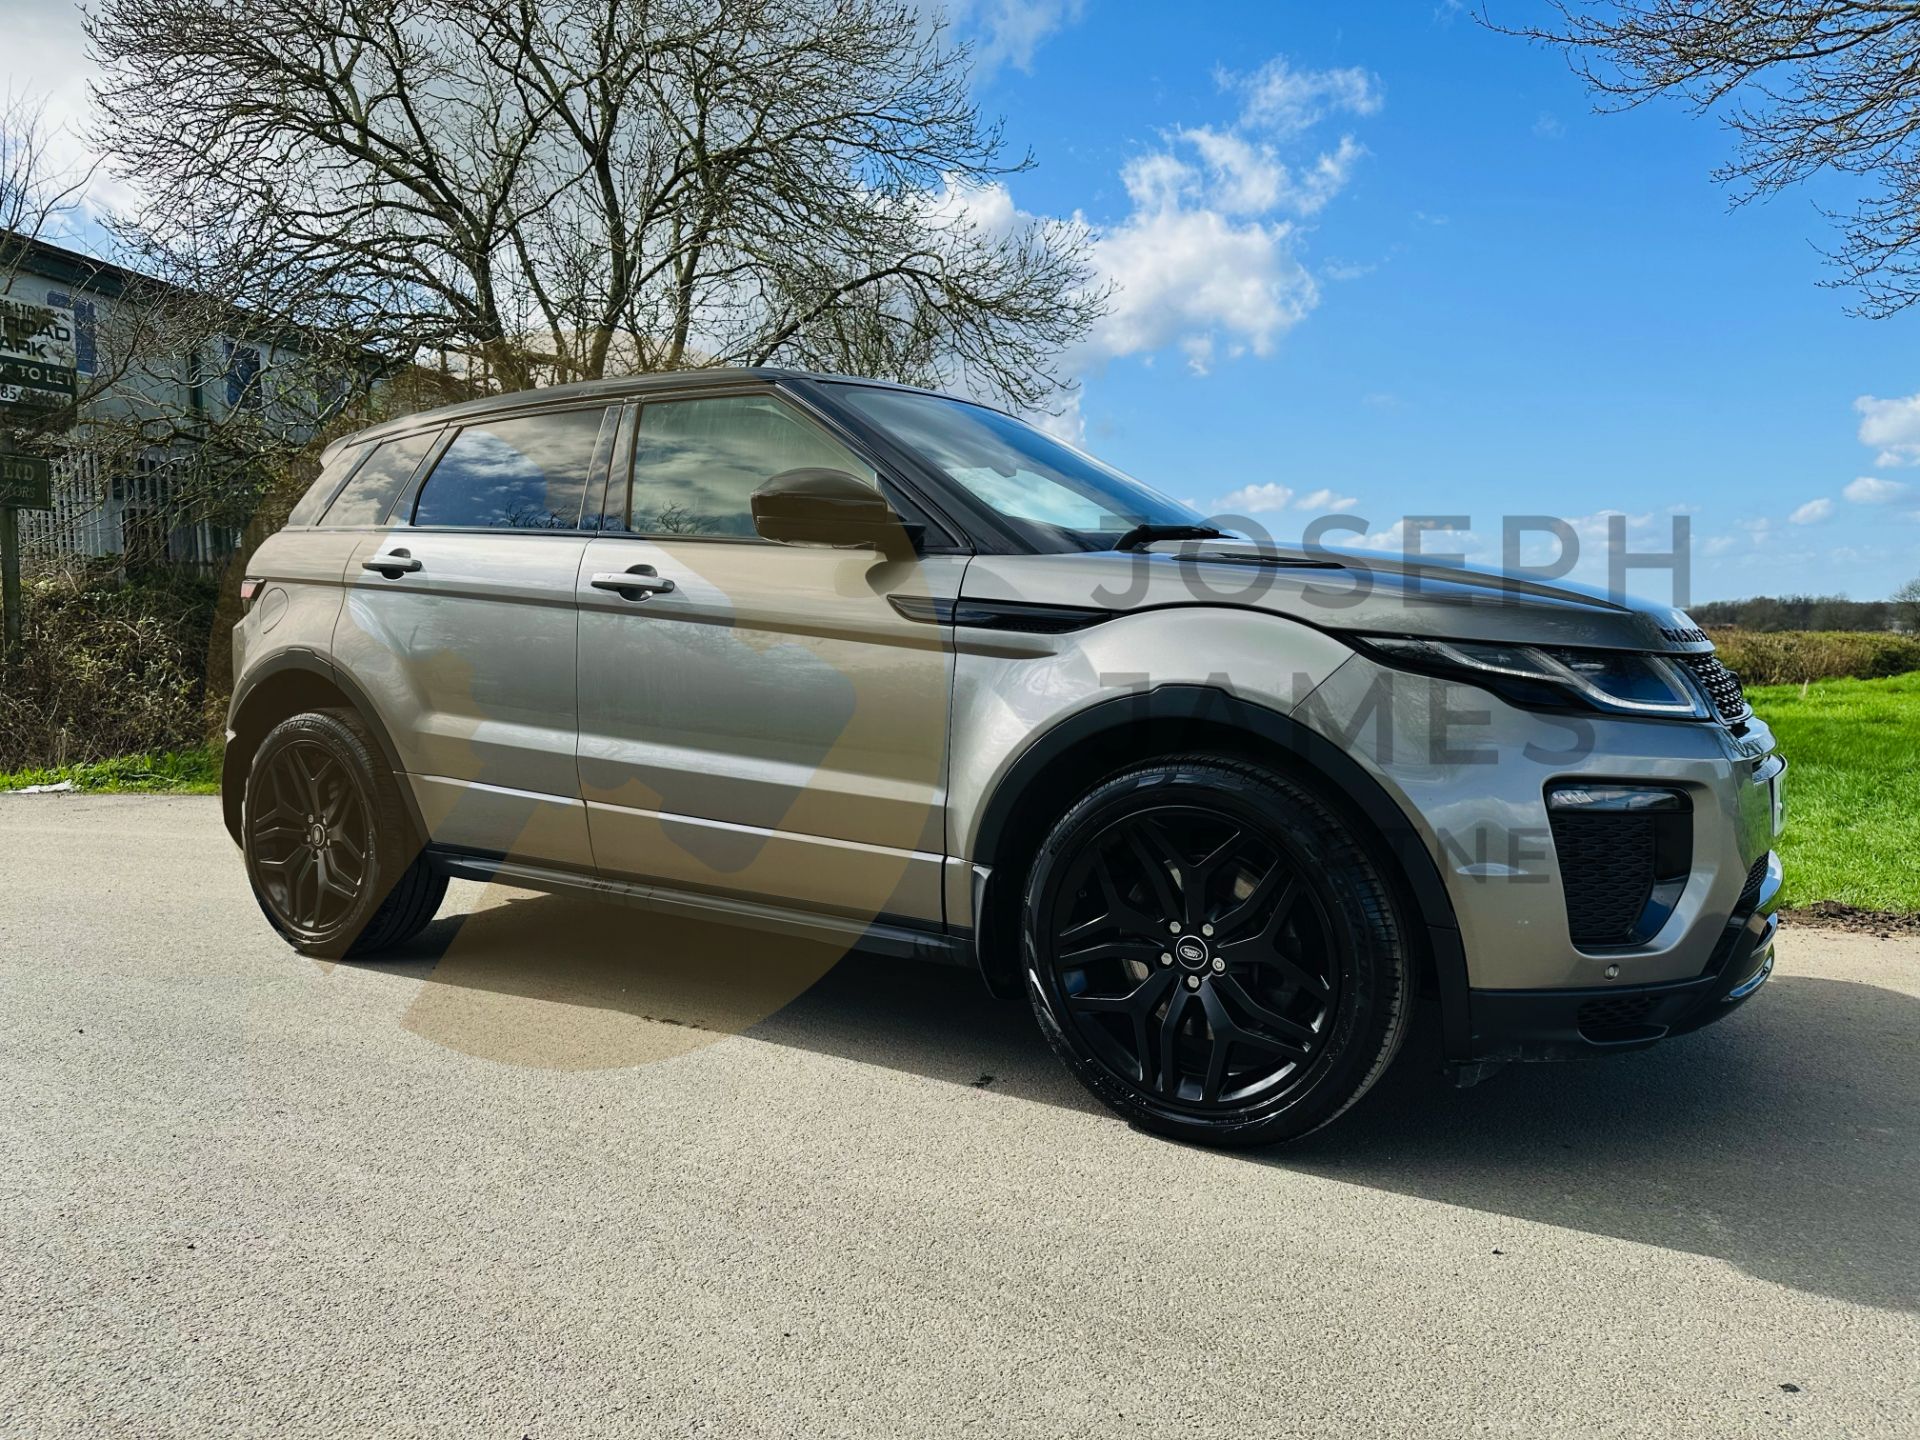 (On Sale) RANGE ROVER EVOQUE *HSE DYNAMIC* SUV (2018 - EURO 6) 2.0 SD4 - AUTOMATIC *ULTIMATE SPEC*